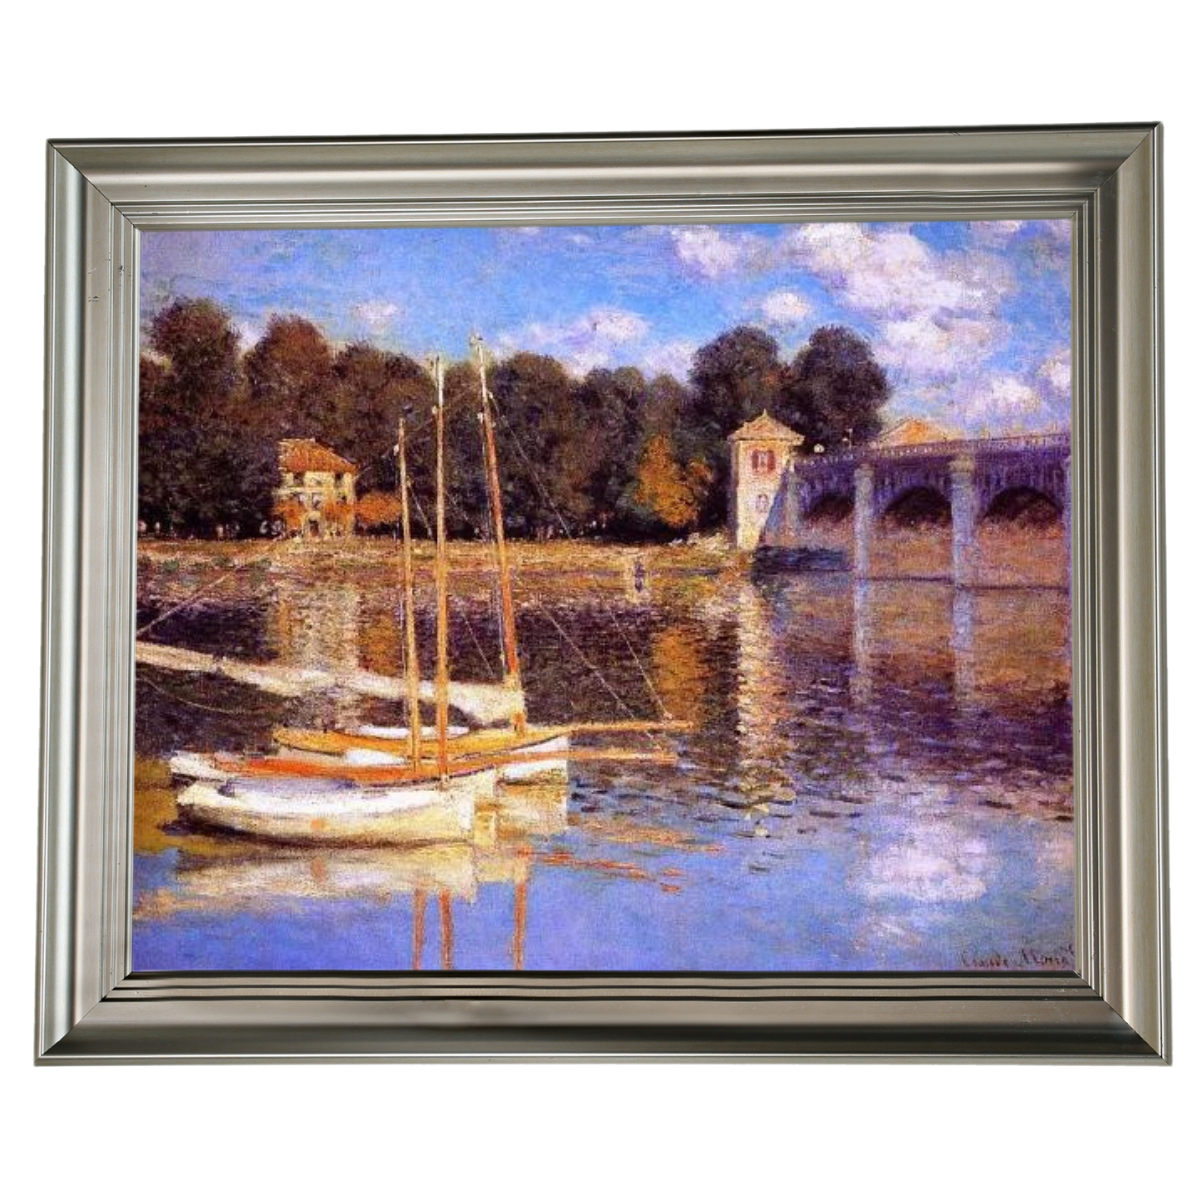 The Bridge at Argenteuil - Vintage Wall Art Prints Decor For Living Room